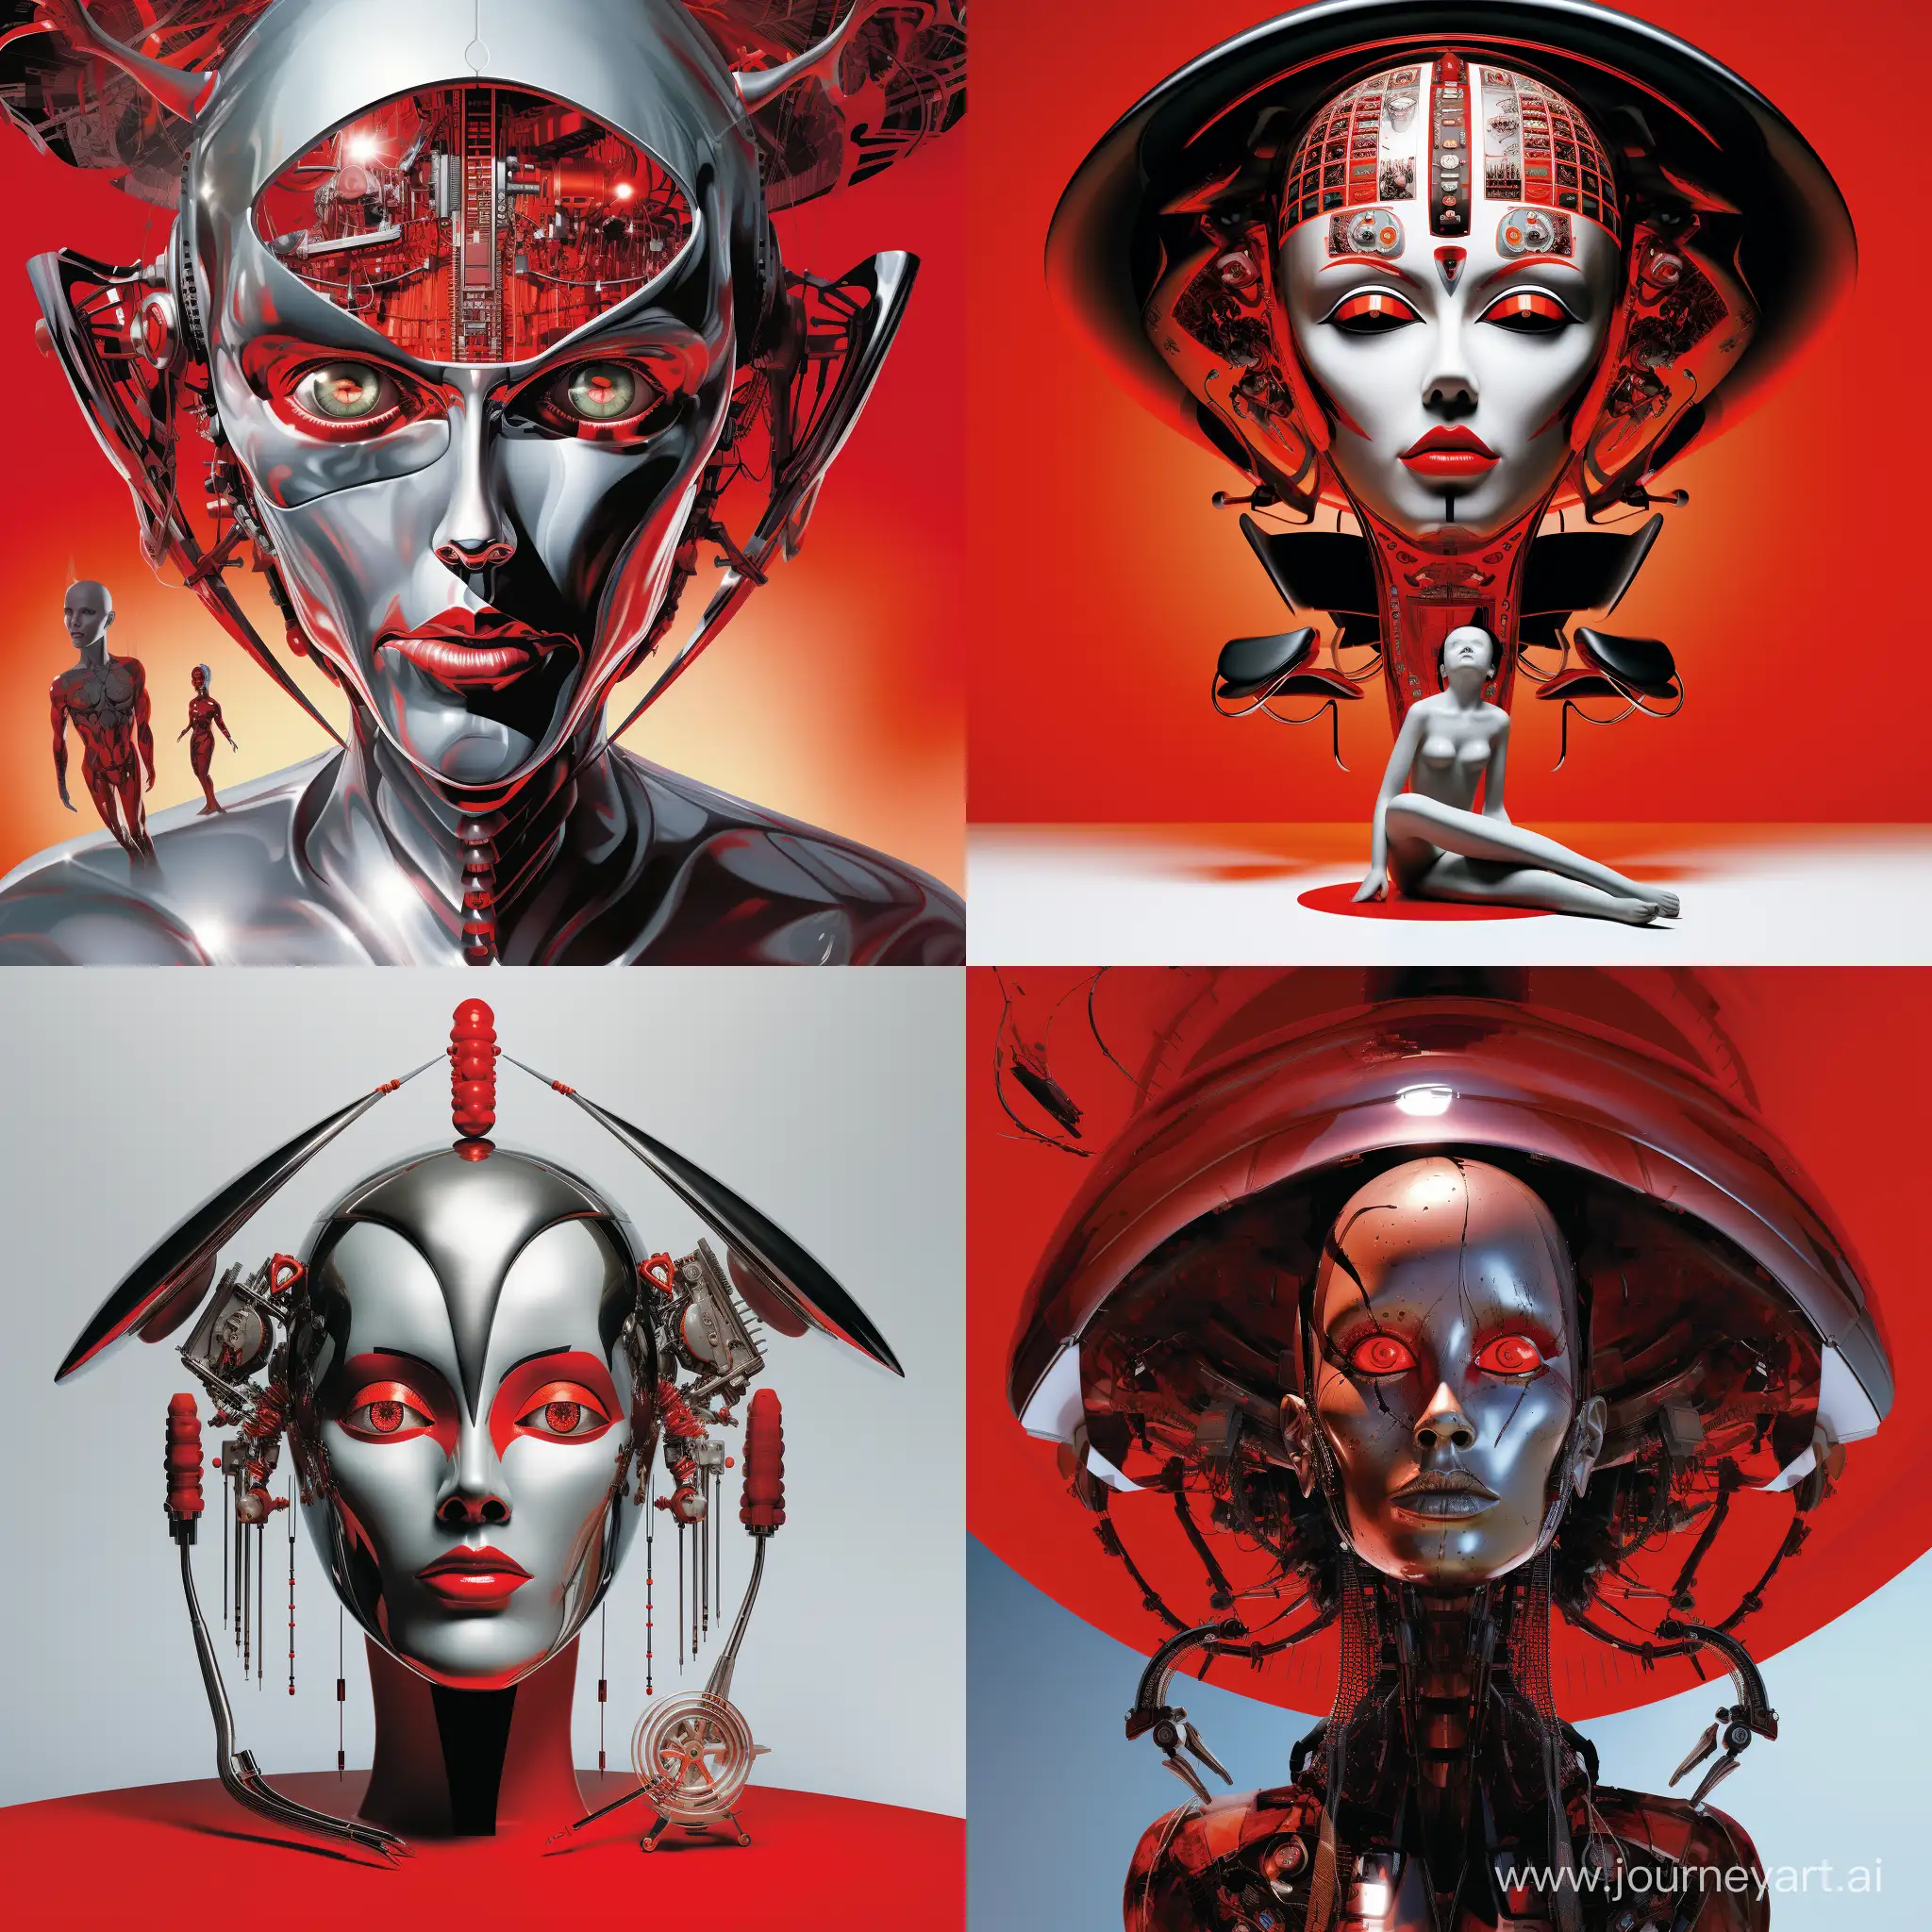 The image features a large, futuristic head with red eyes and metallic parts as part of its design. This head is the main focus of the scene, which also includes various other objects such as a chair, a clock, and an umbrella. Additionally, there are two people in the background, one on the left side and another on the right side of the image. The overall atmosphere appears to be futuristic and somewhat eerie.